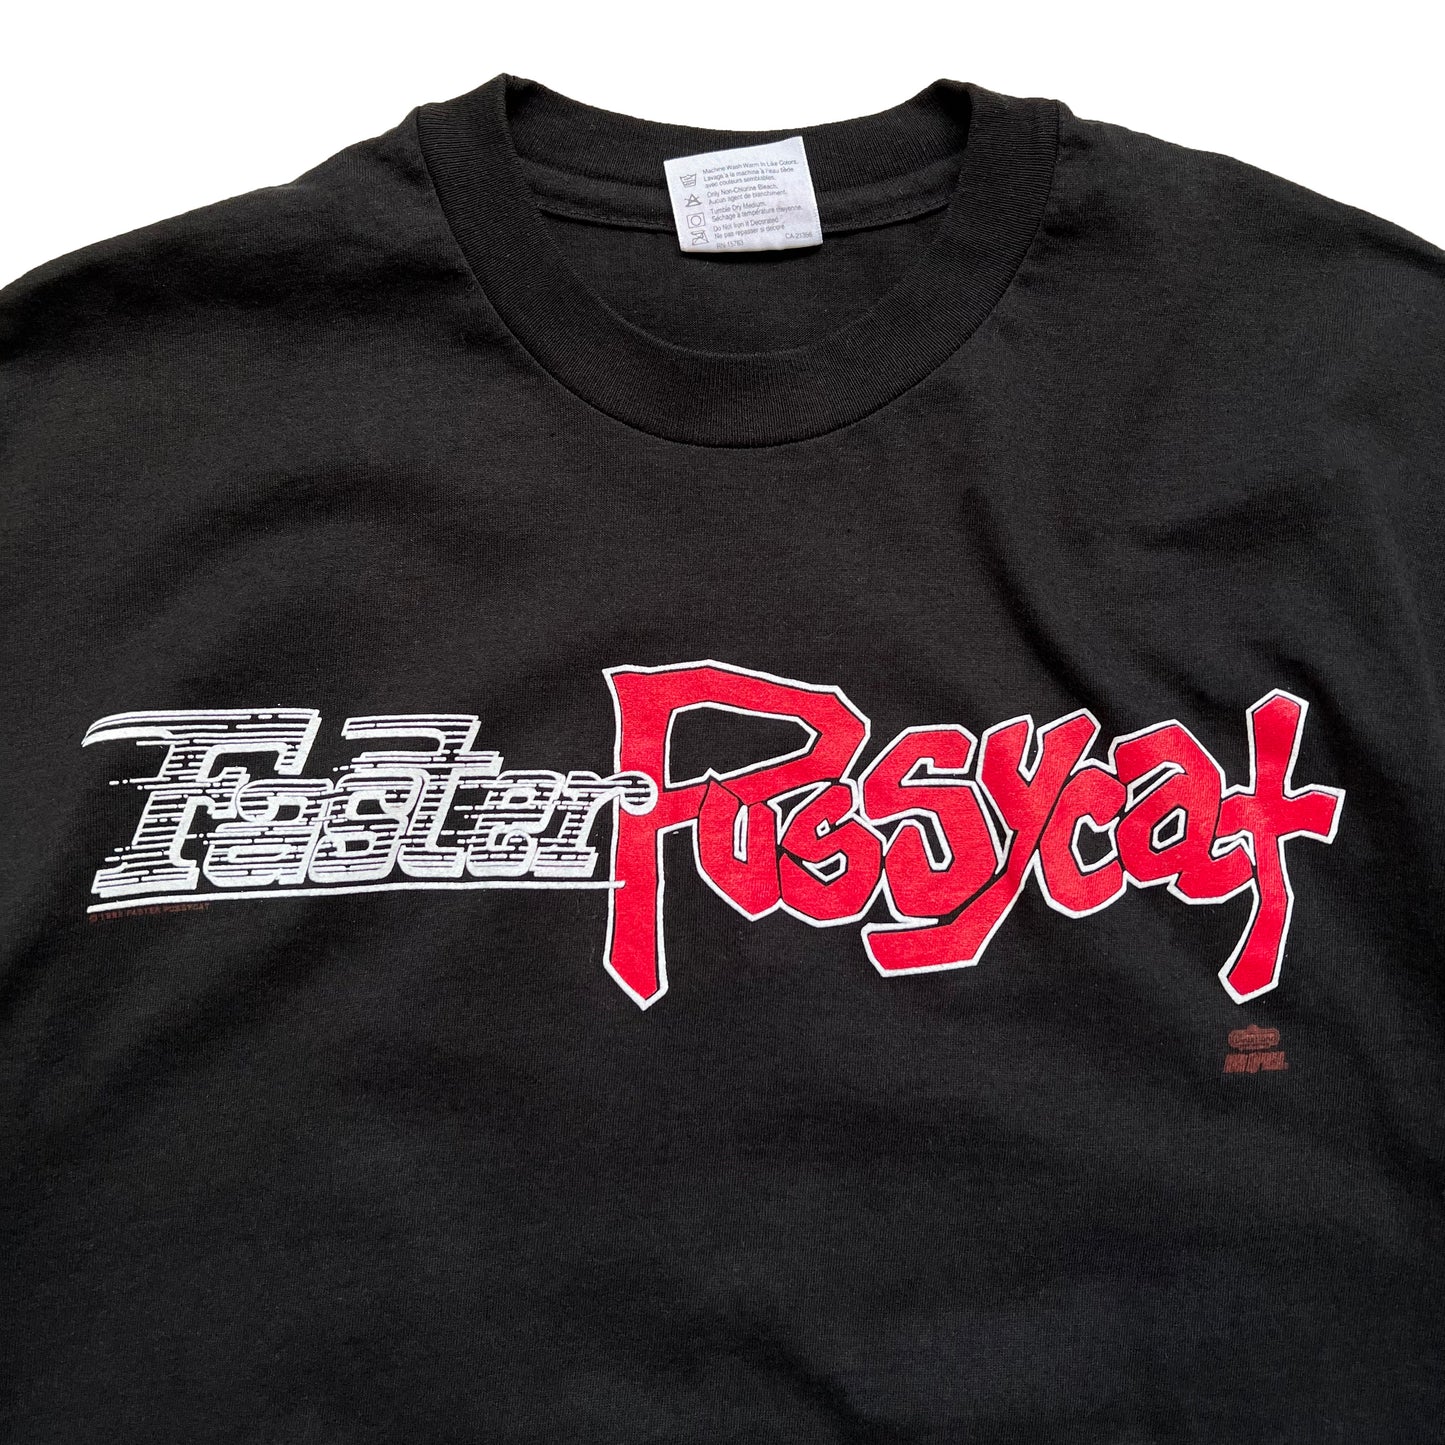 90's Faster Pussycat "WHIPPED!" T-SHIRT